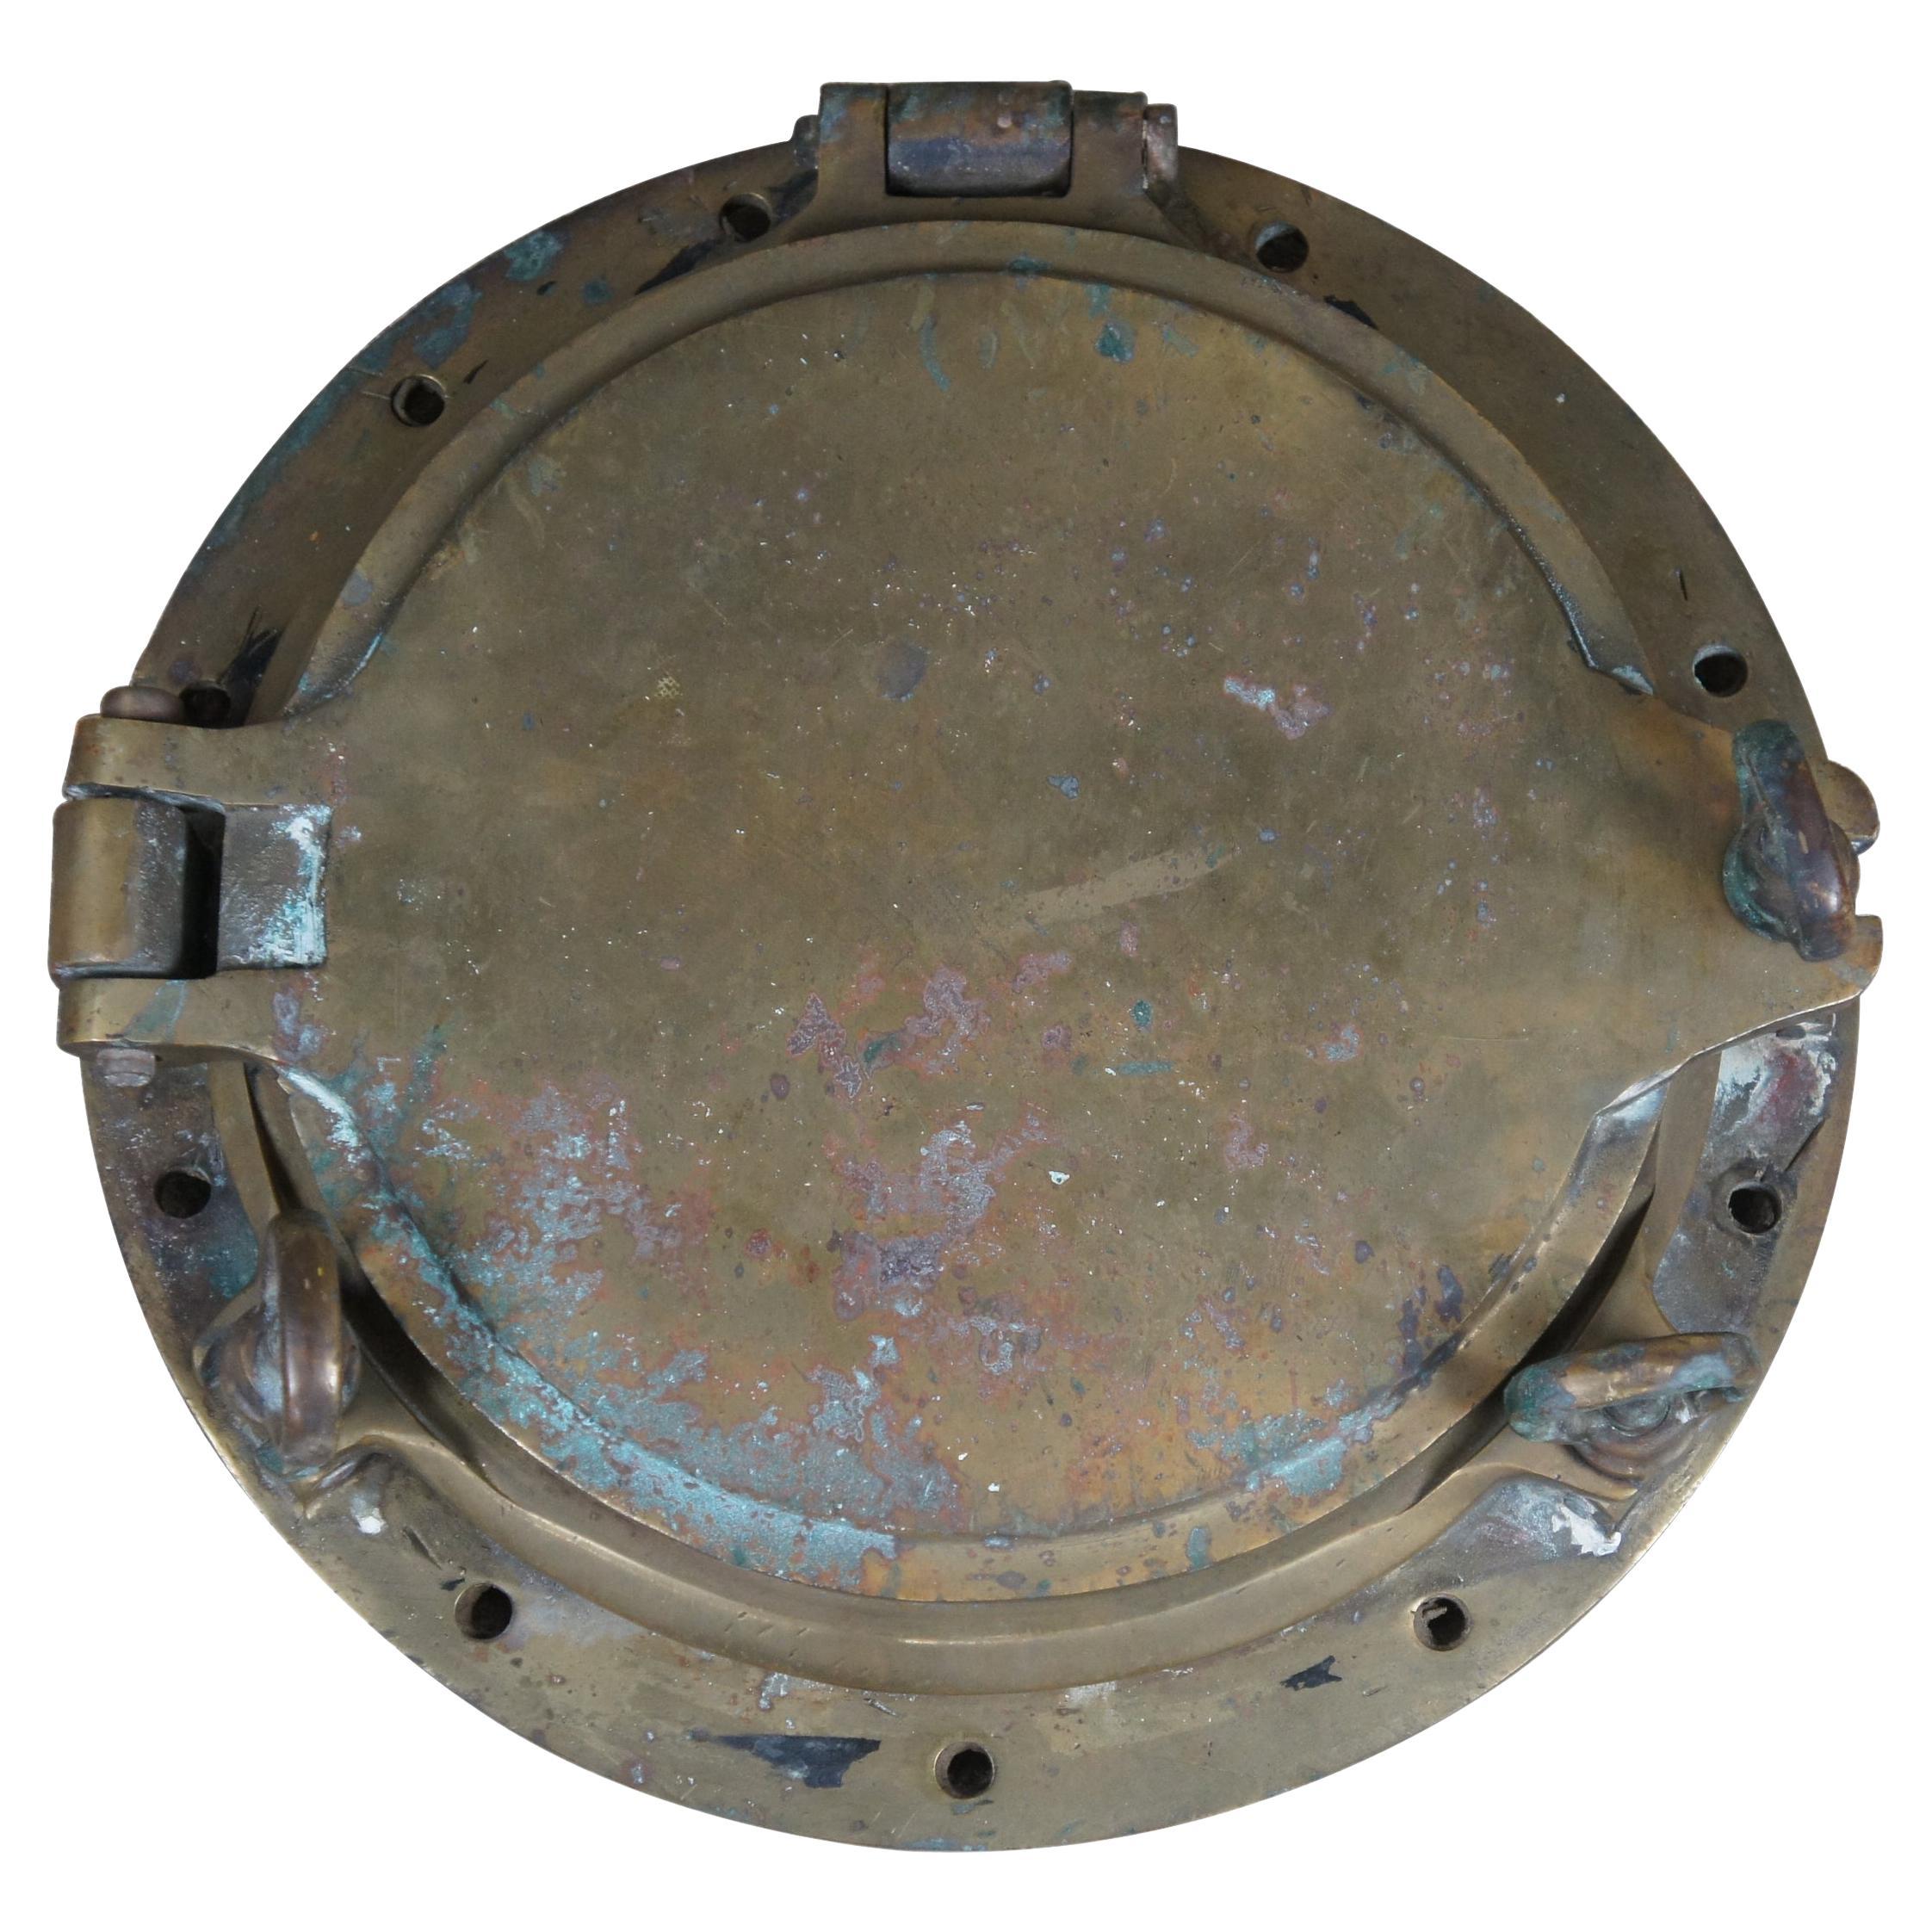 Extremely unique original antique heavy solid brass maritime Ship's Porthole or Hatch. A rare find with storm door, swing plate and barking plate. Its very unusual to find a complete porthole with swing plate. They are most often found as just a